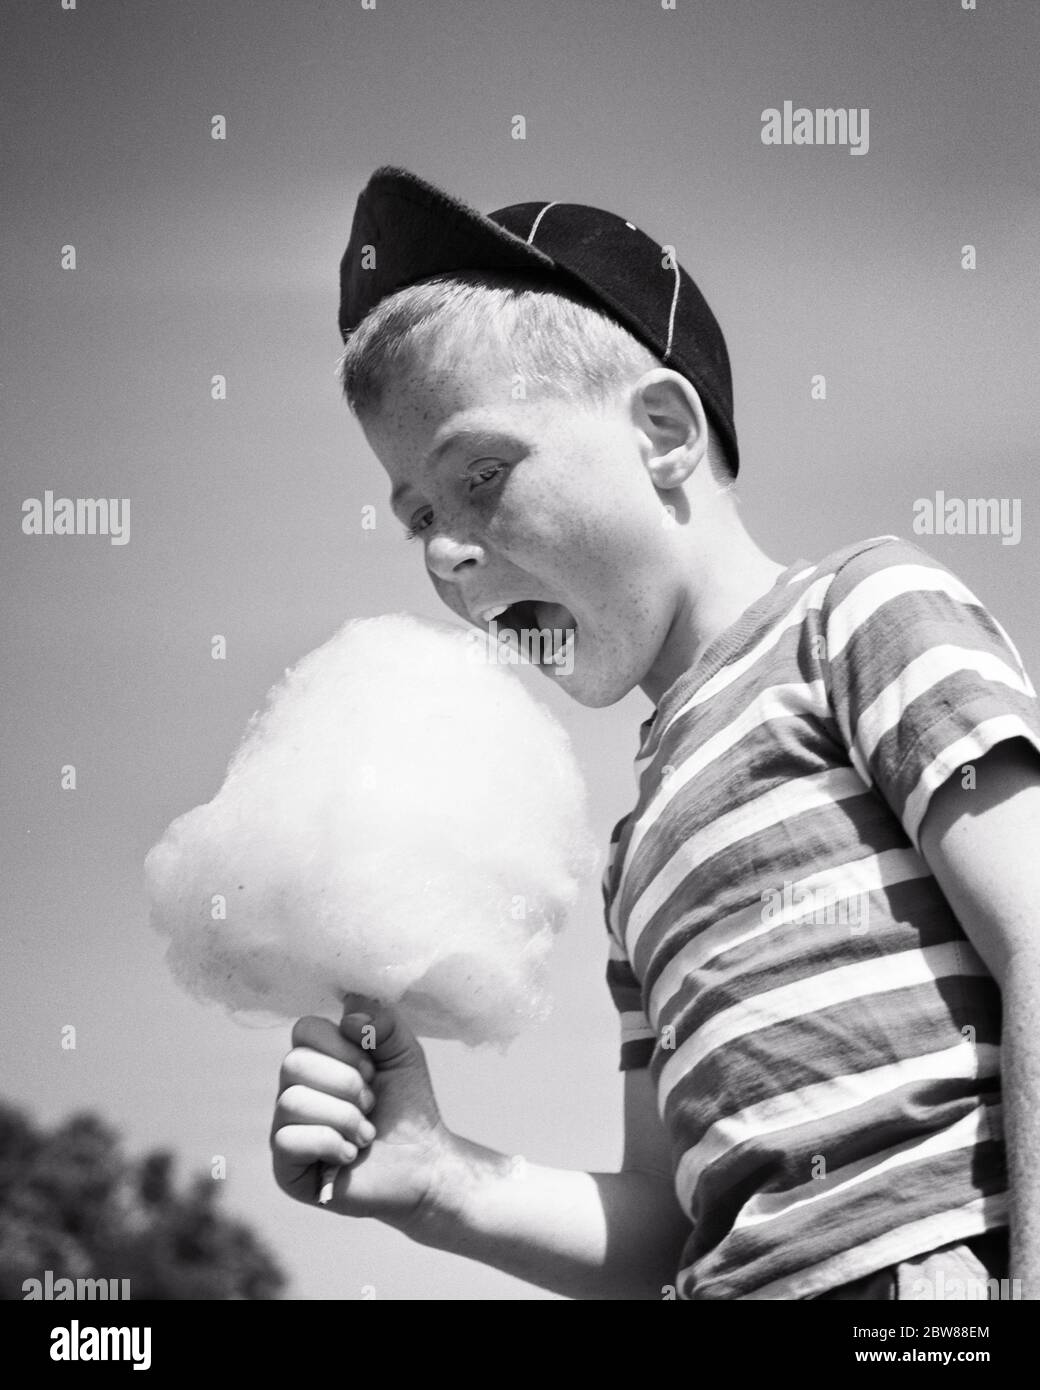 1950s BOY WEARING BASEBALL CAP AND STRIPED TEE SHIRT MOUTH WIDE OPEN EATING CARNIVAL COTTON CANDY TREAT - j2278 HEL001 HARS STRIPES SUGAR B&W SUMMERTIME PRETEEN BOY HAPPINESS AND EXCITEMENT LOW ANGLE OPEN MOUTH WIDE OPEN BITING STYLISH BASEBALL CAP COTTON CANDY JUVENILES PRE-TEEN PRE-TEEN BOY AMUSEMENT PARK BALL CAP BLACK AND WHITE CAUCASIAN ETHNICITY DELICIOUS MOUTH OPEN OLD FASHIONED Stock Photo